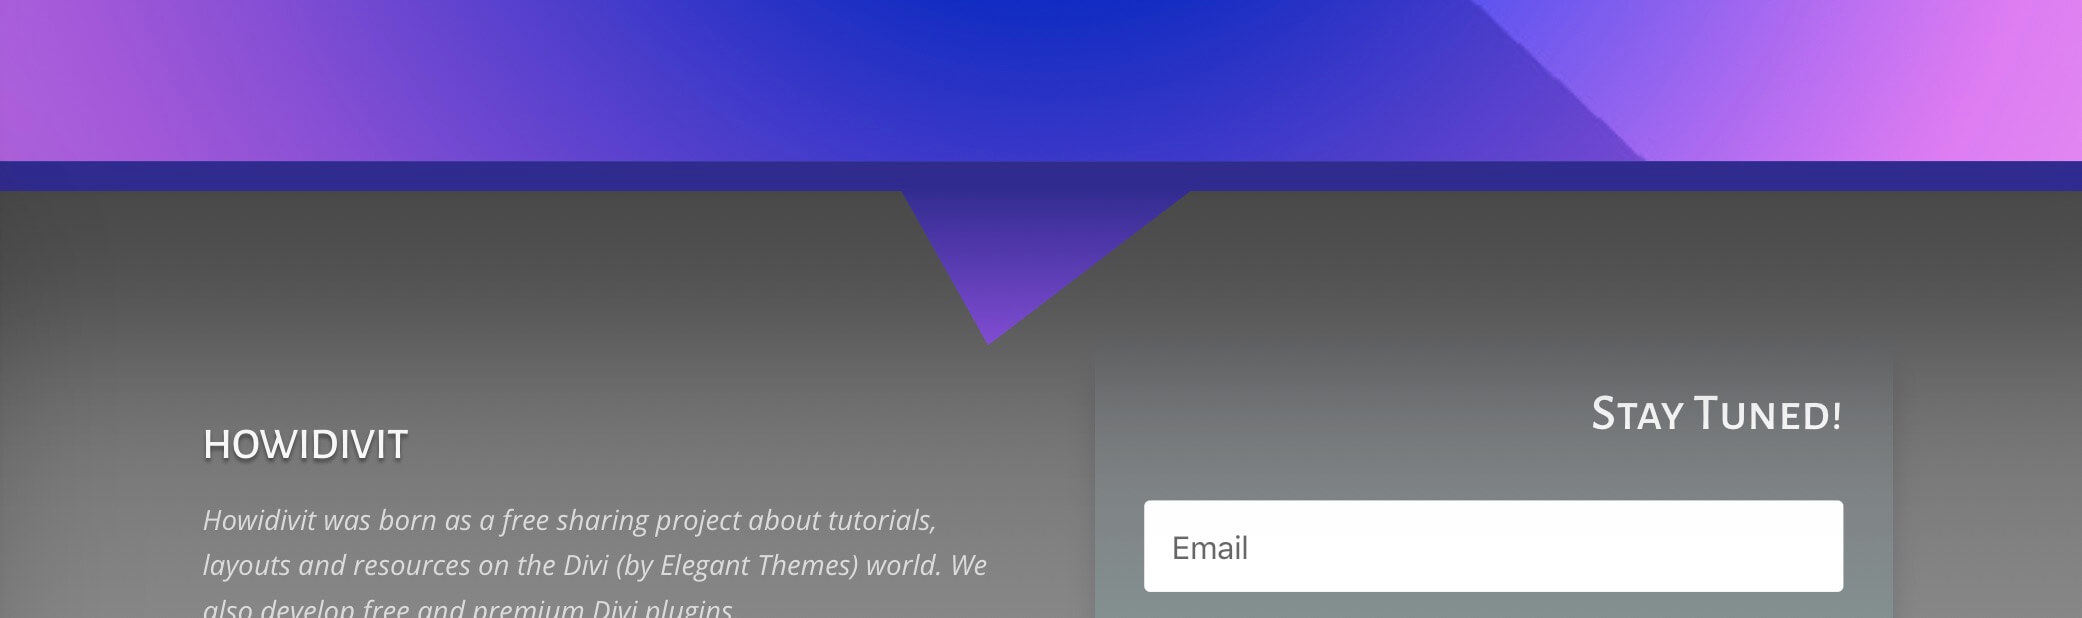 Divi Css Section Dividers and Transitions I – The Asymmetric Triangle one